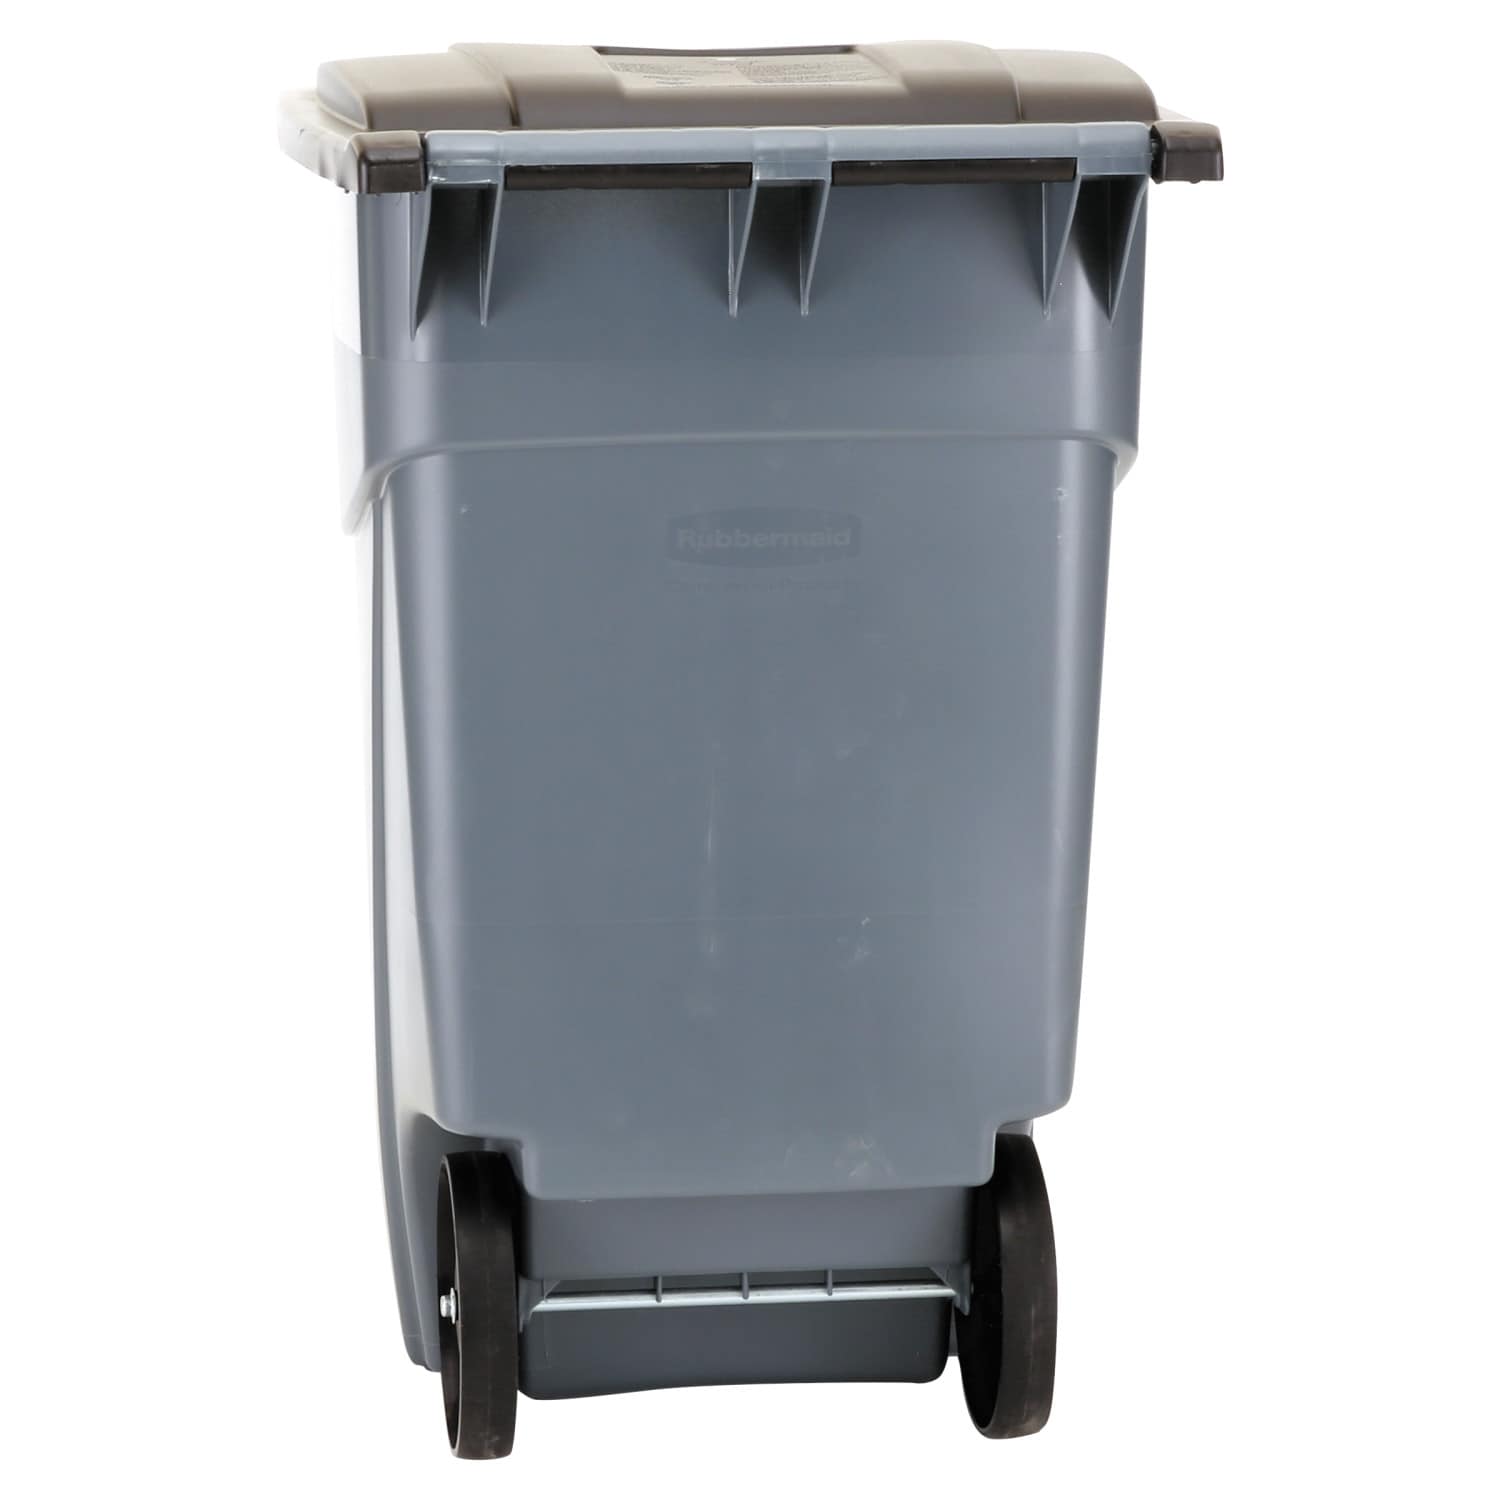 Outdoor Plastic 500L Trash Can With Wheels - Buy trash can, garbage can,  recycle bins Product on Chinese provider of commercial and industrial grade  plastic pallets and material handling containers for the